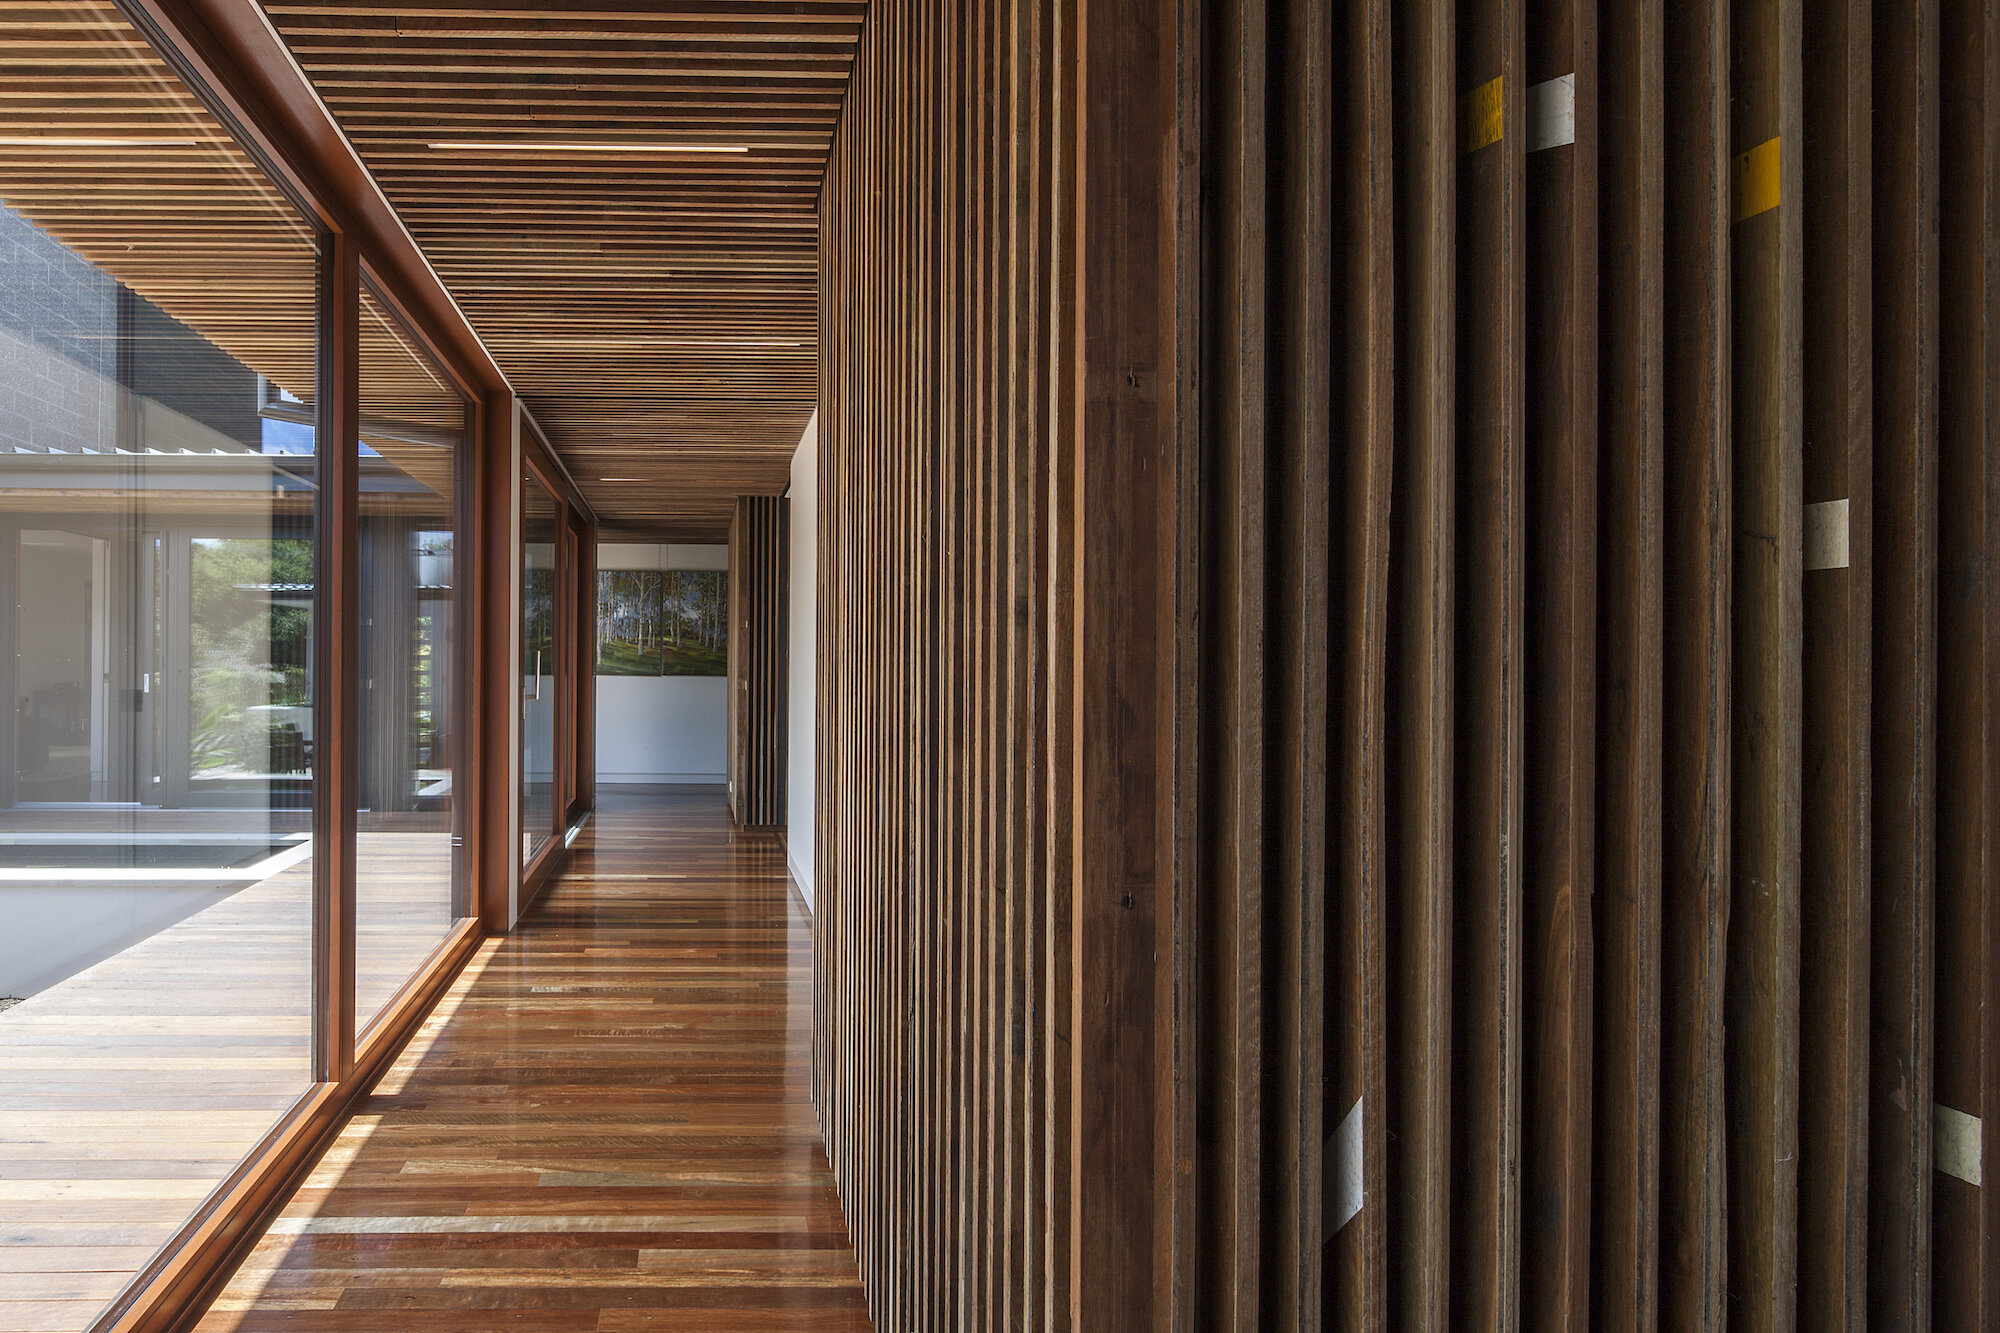 Corridor with featured timber cladding wall at National Convention Centre